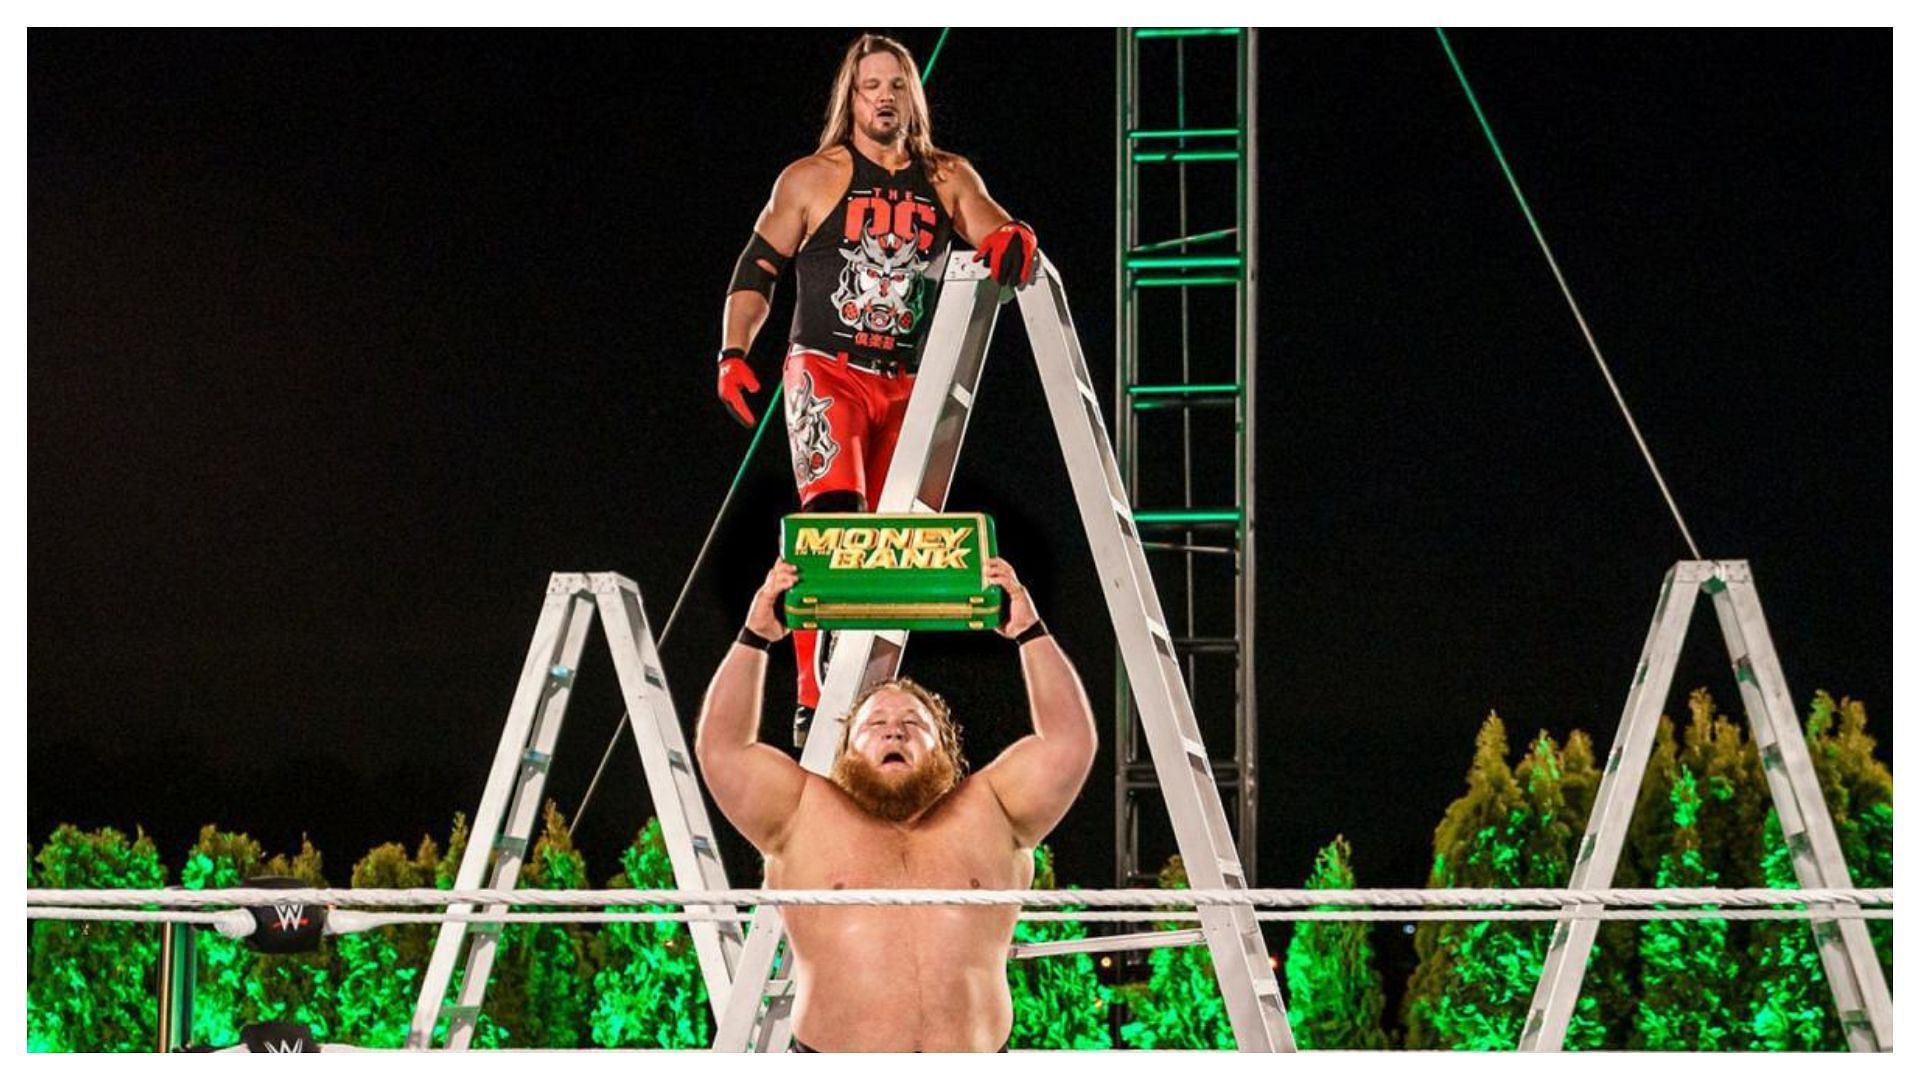 Otis won the 2020 Money In The Bank contract